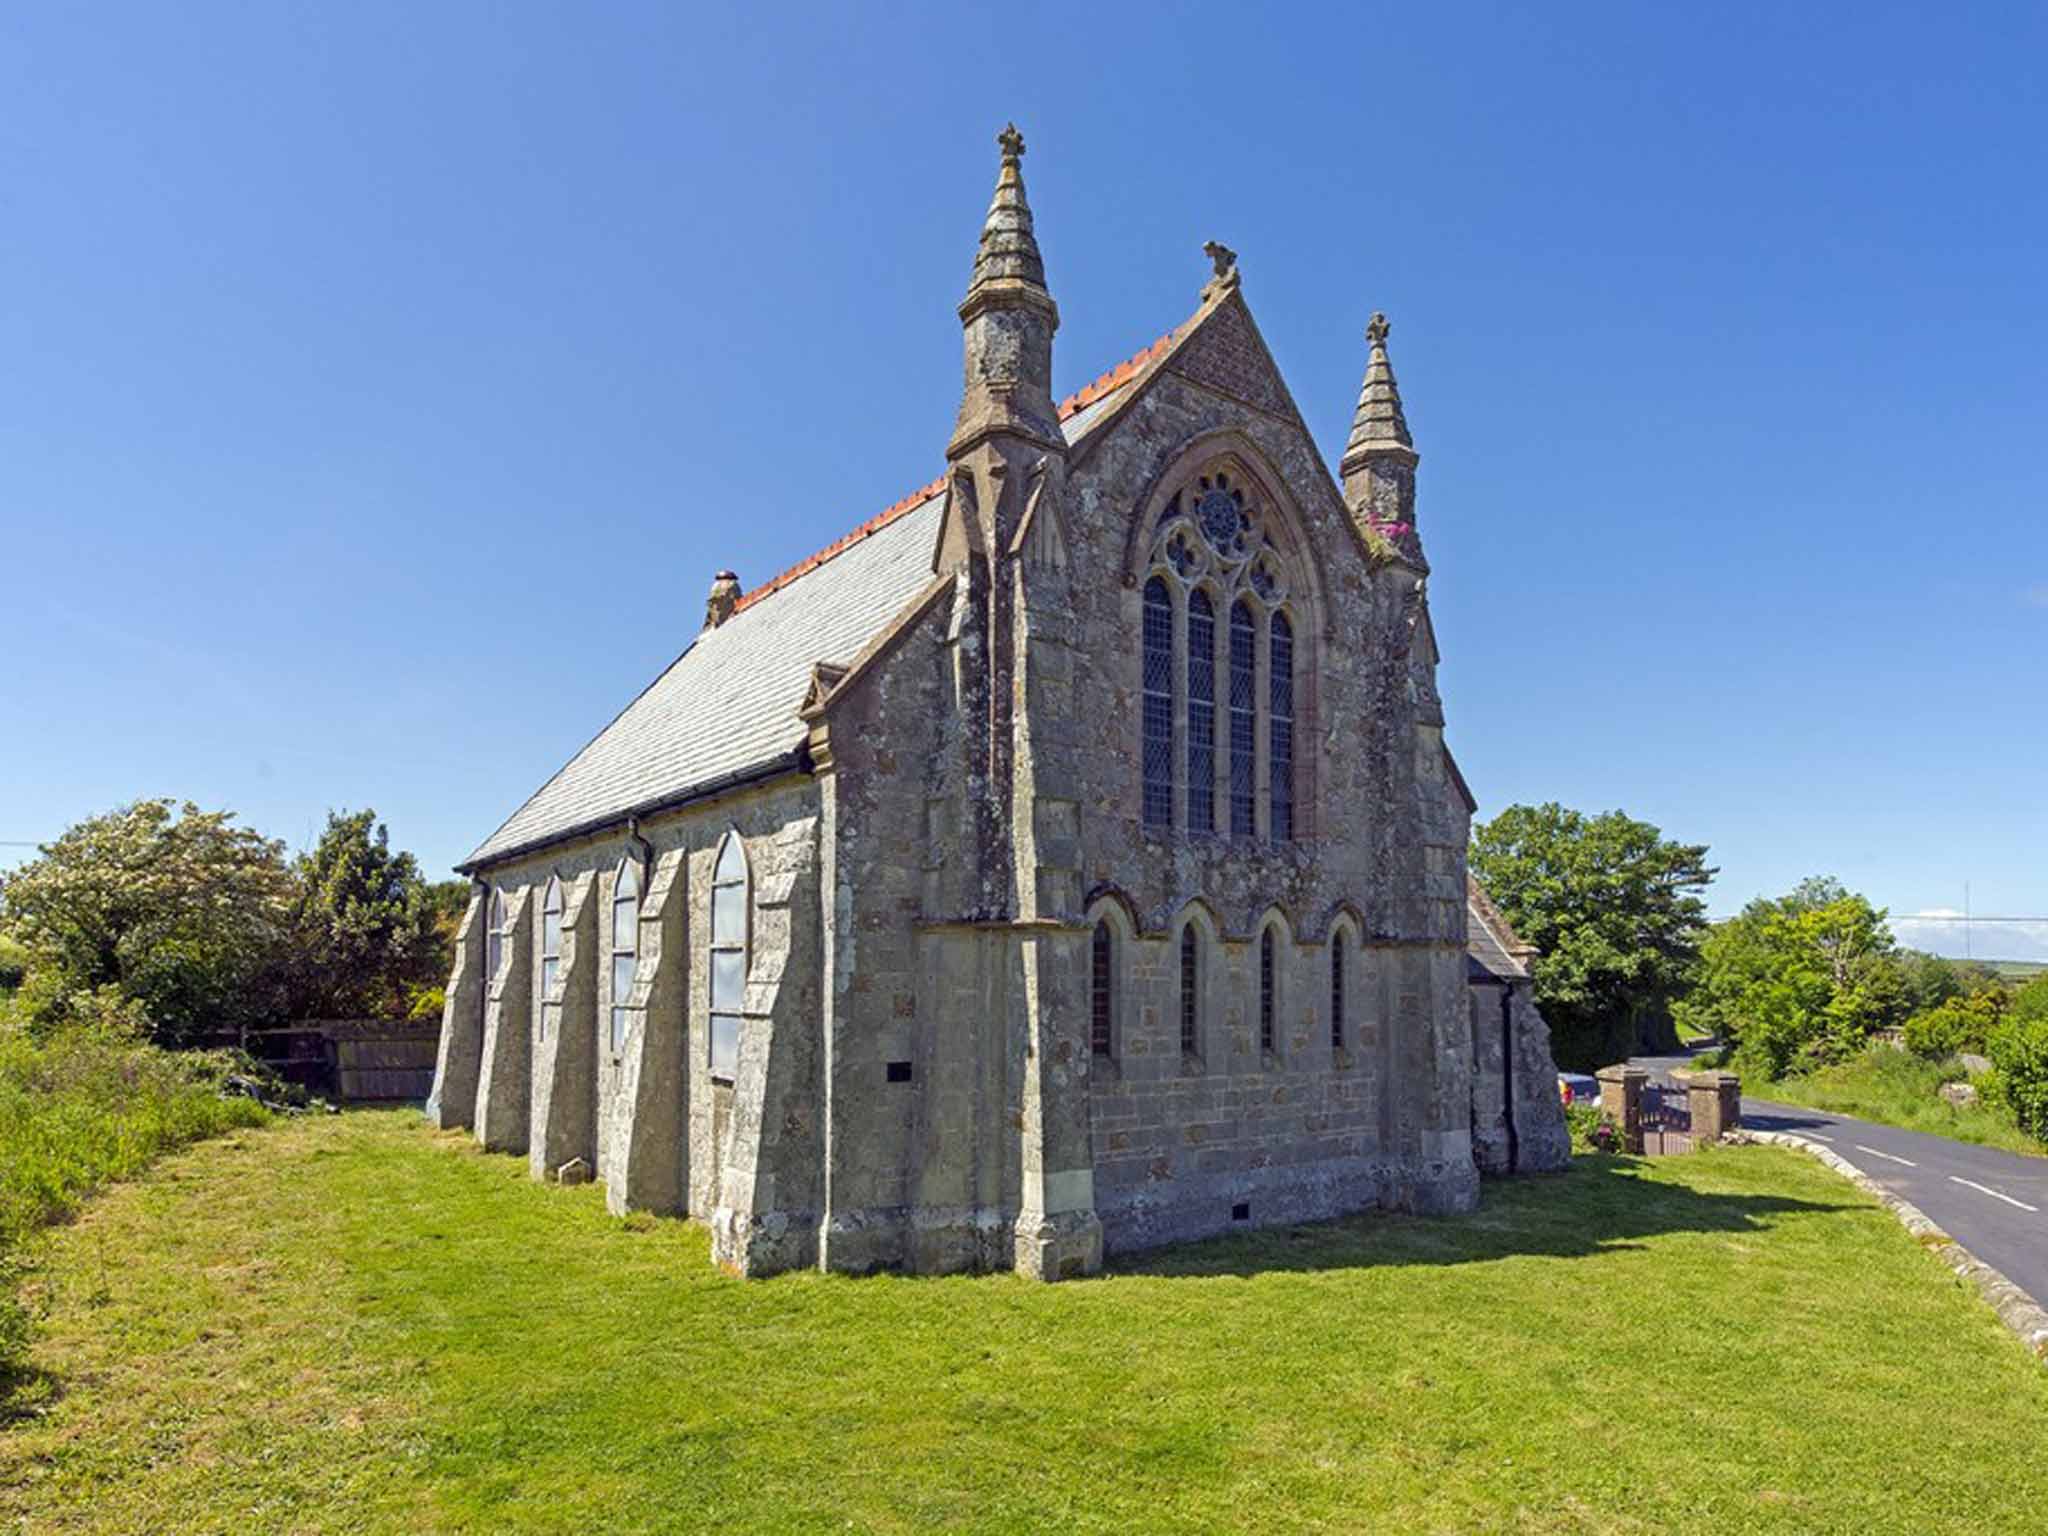 Detached converted Methodist chapel for sale, Newman Lane, Chale Green, Ventnor PO38. On with Biles for offers over £295,000.